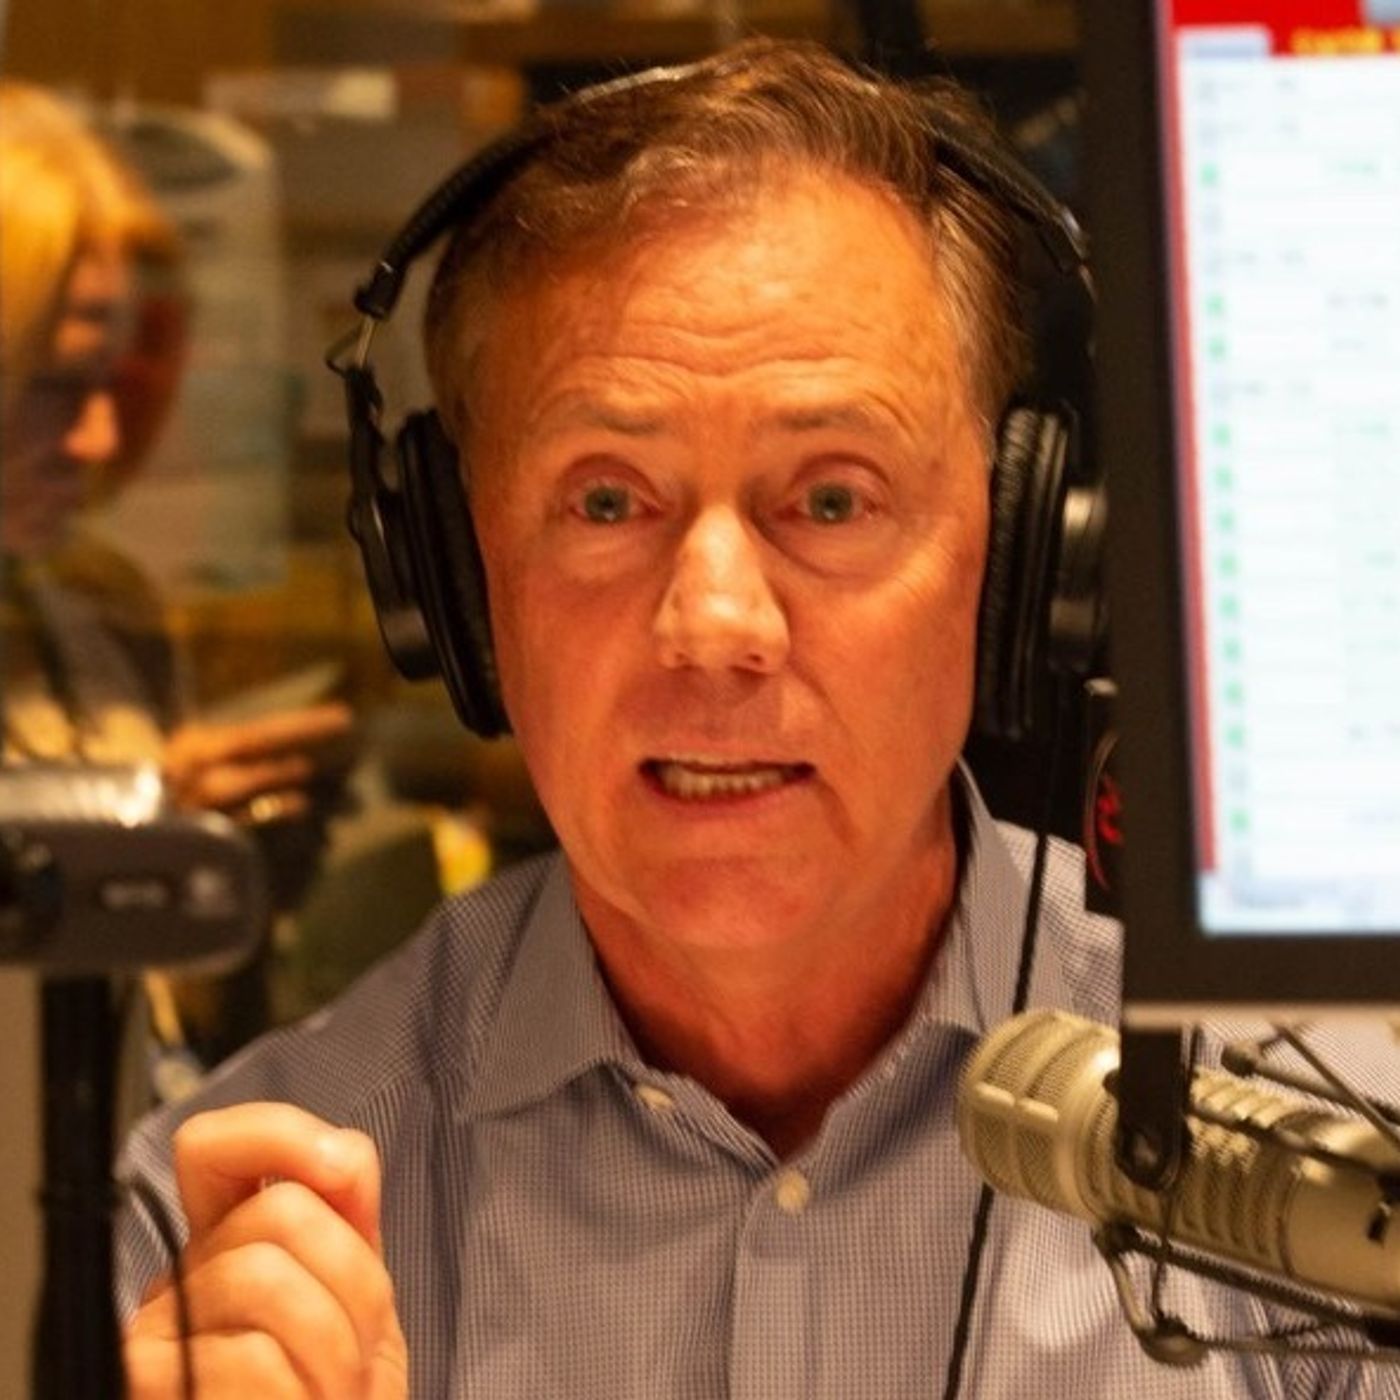 Governor Lamont on George Floyd Protests, Phase 2 of Reopening CT, and more